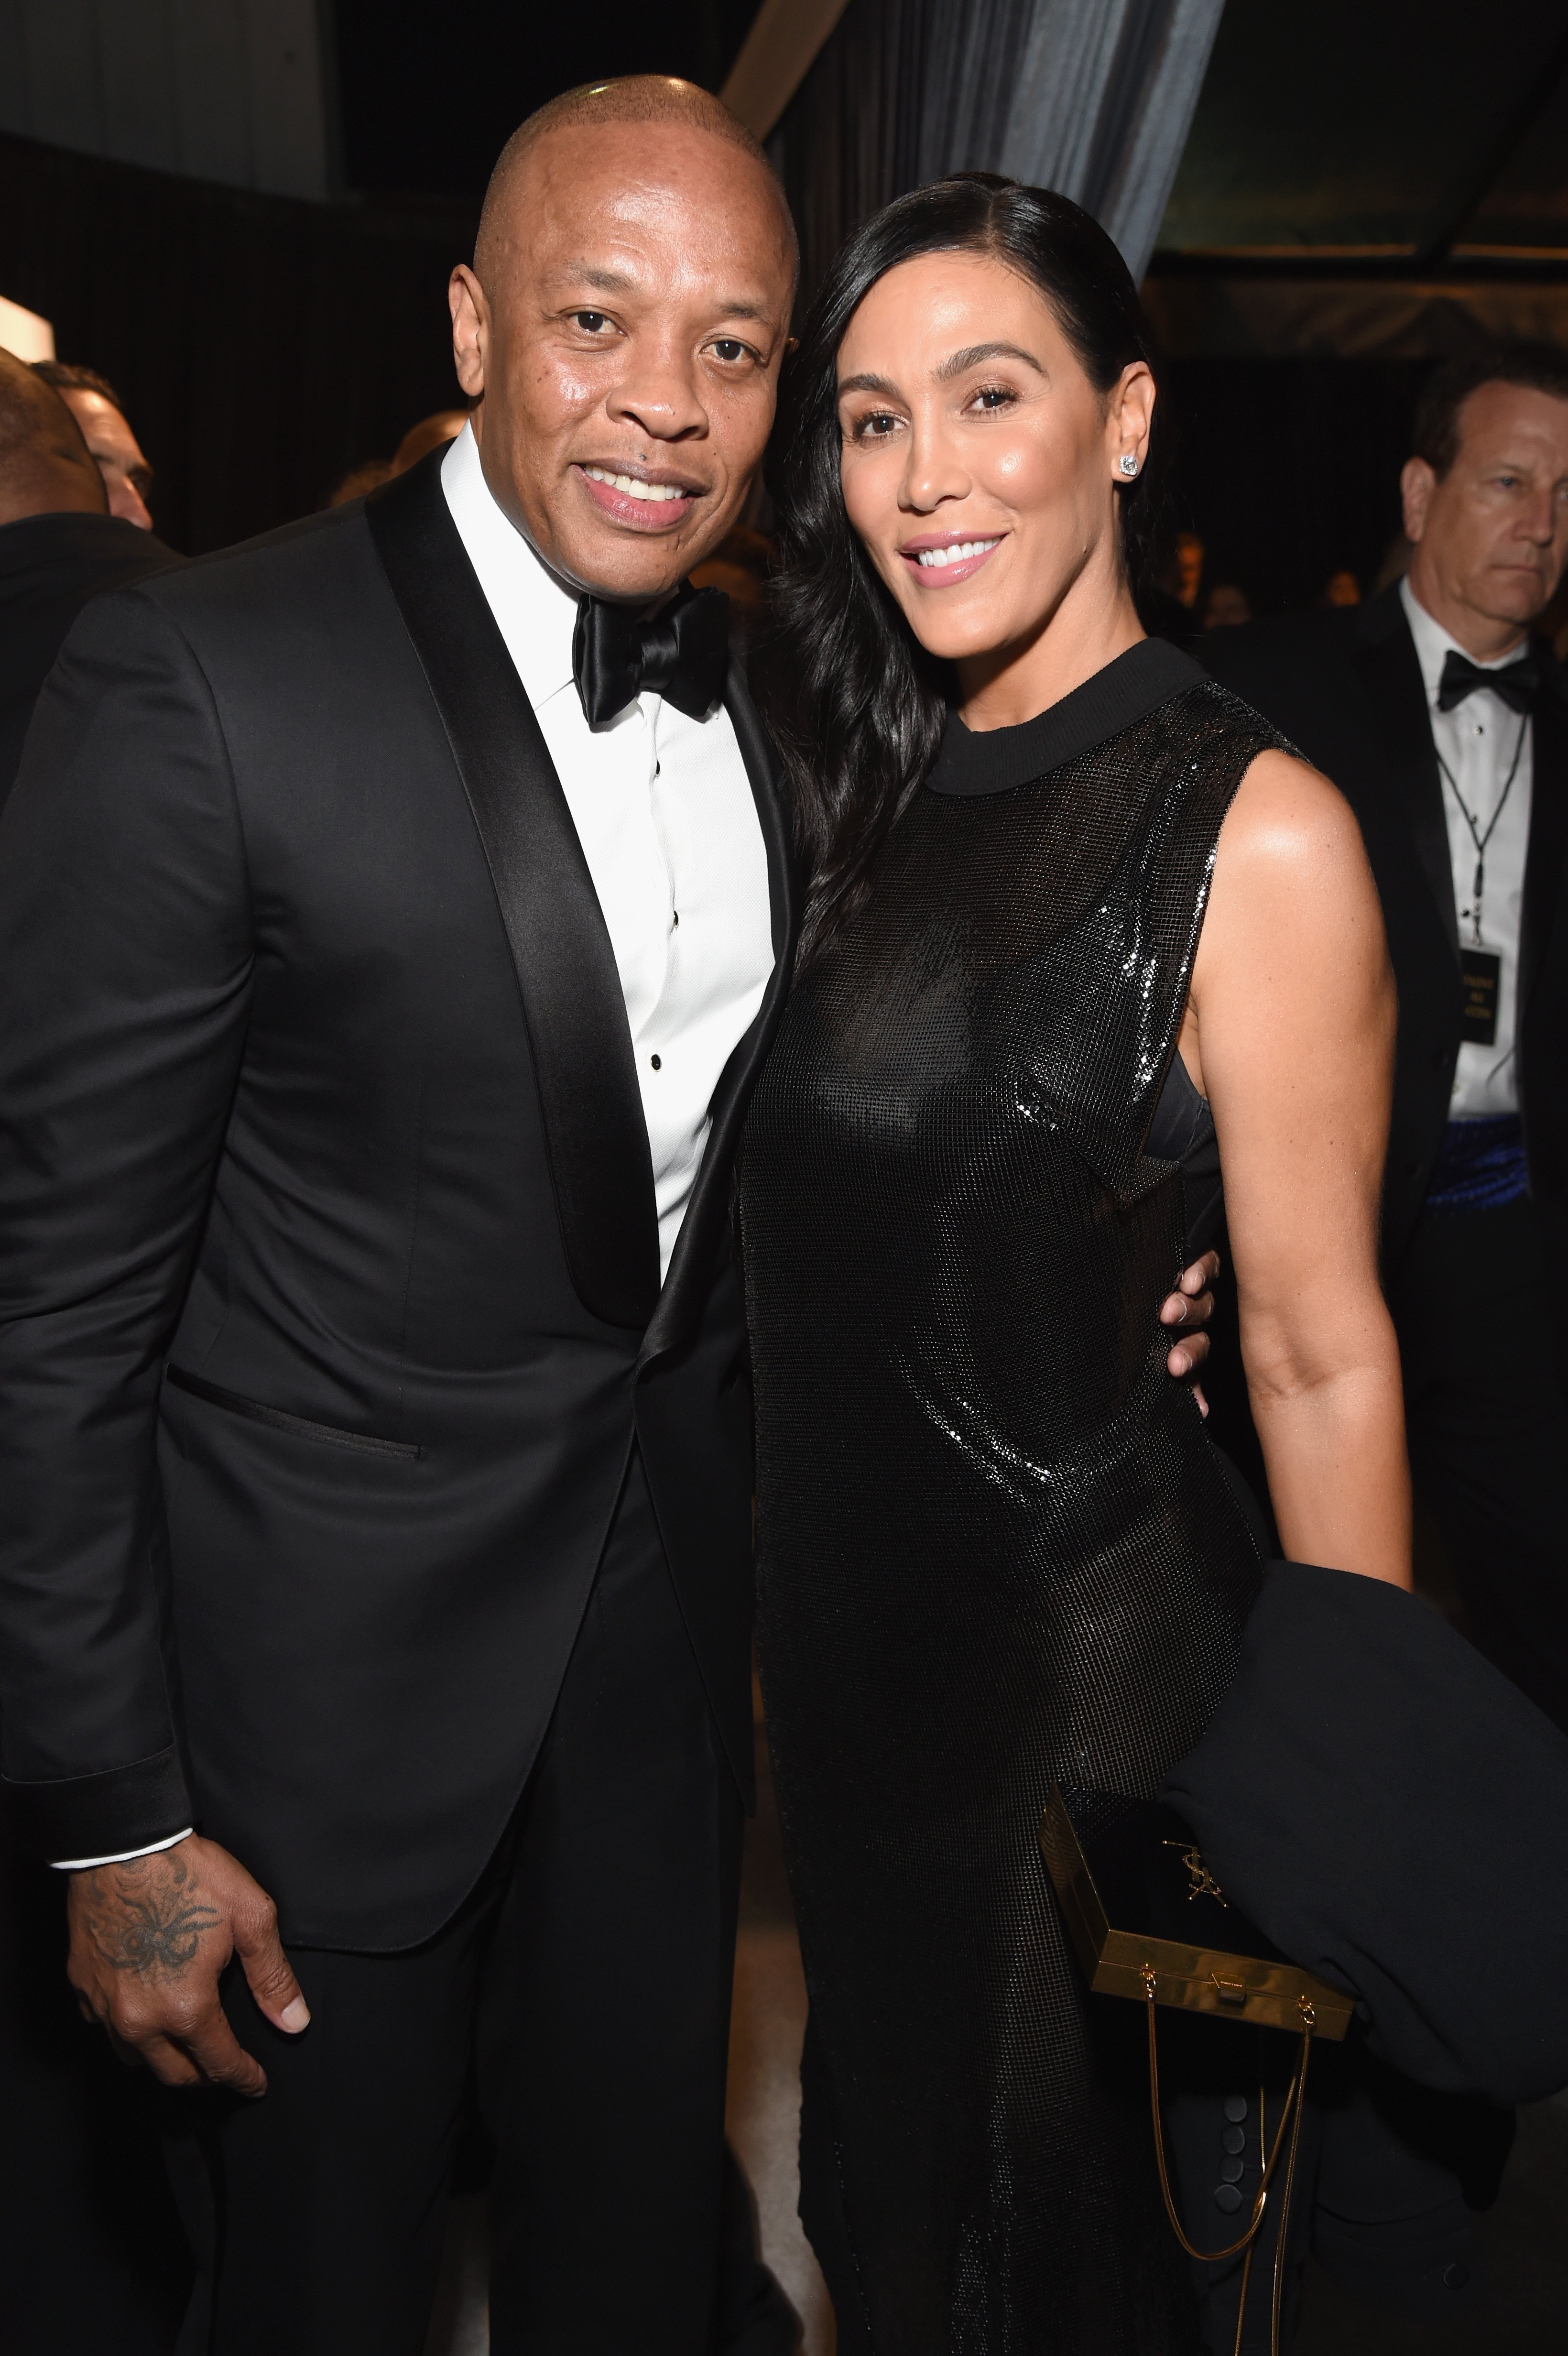 Dr. Dre and Nicole Young at the City of Hope Spirit of Life Gala 2018 at Barker Hangar on October 11, 2018 in Santa Monica, California| Source: Getty Images